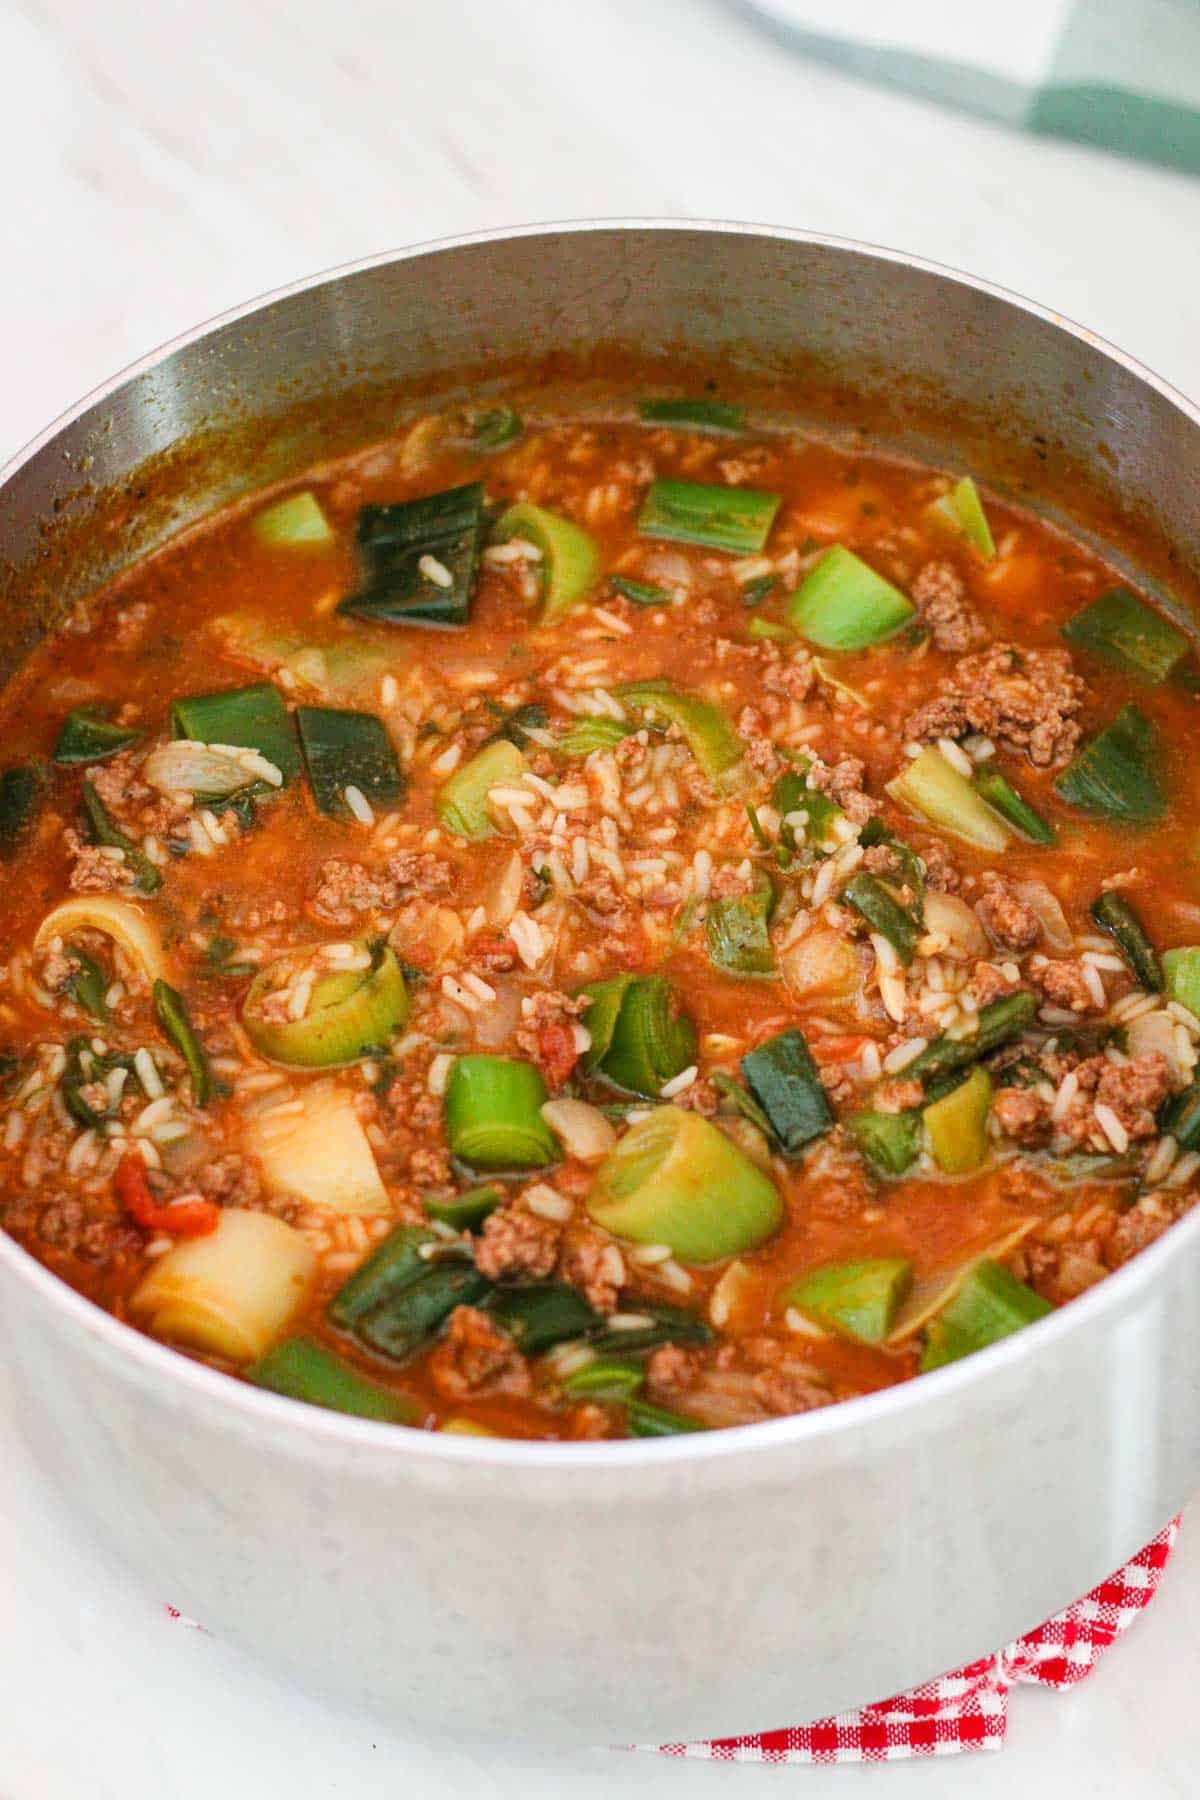 Pot with cooked leeks, rice, tomatoes and other ingredients.